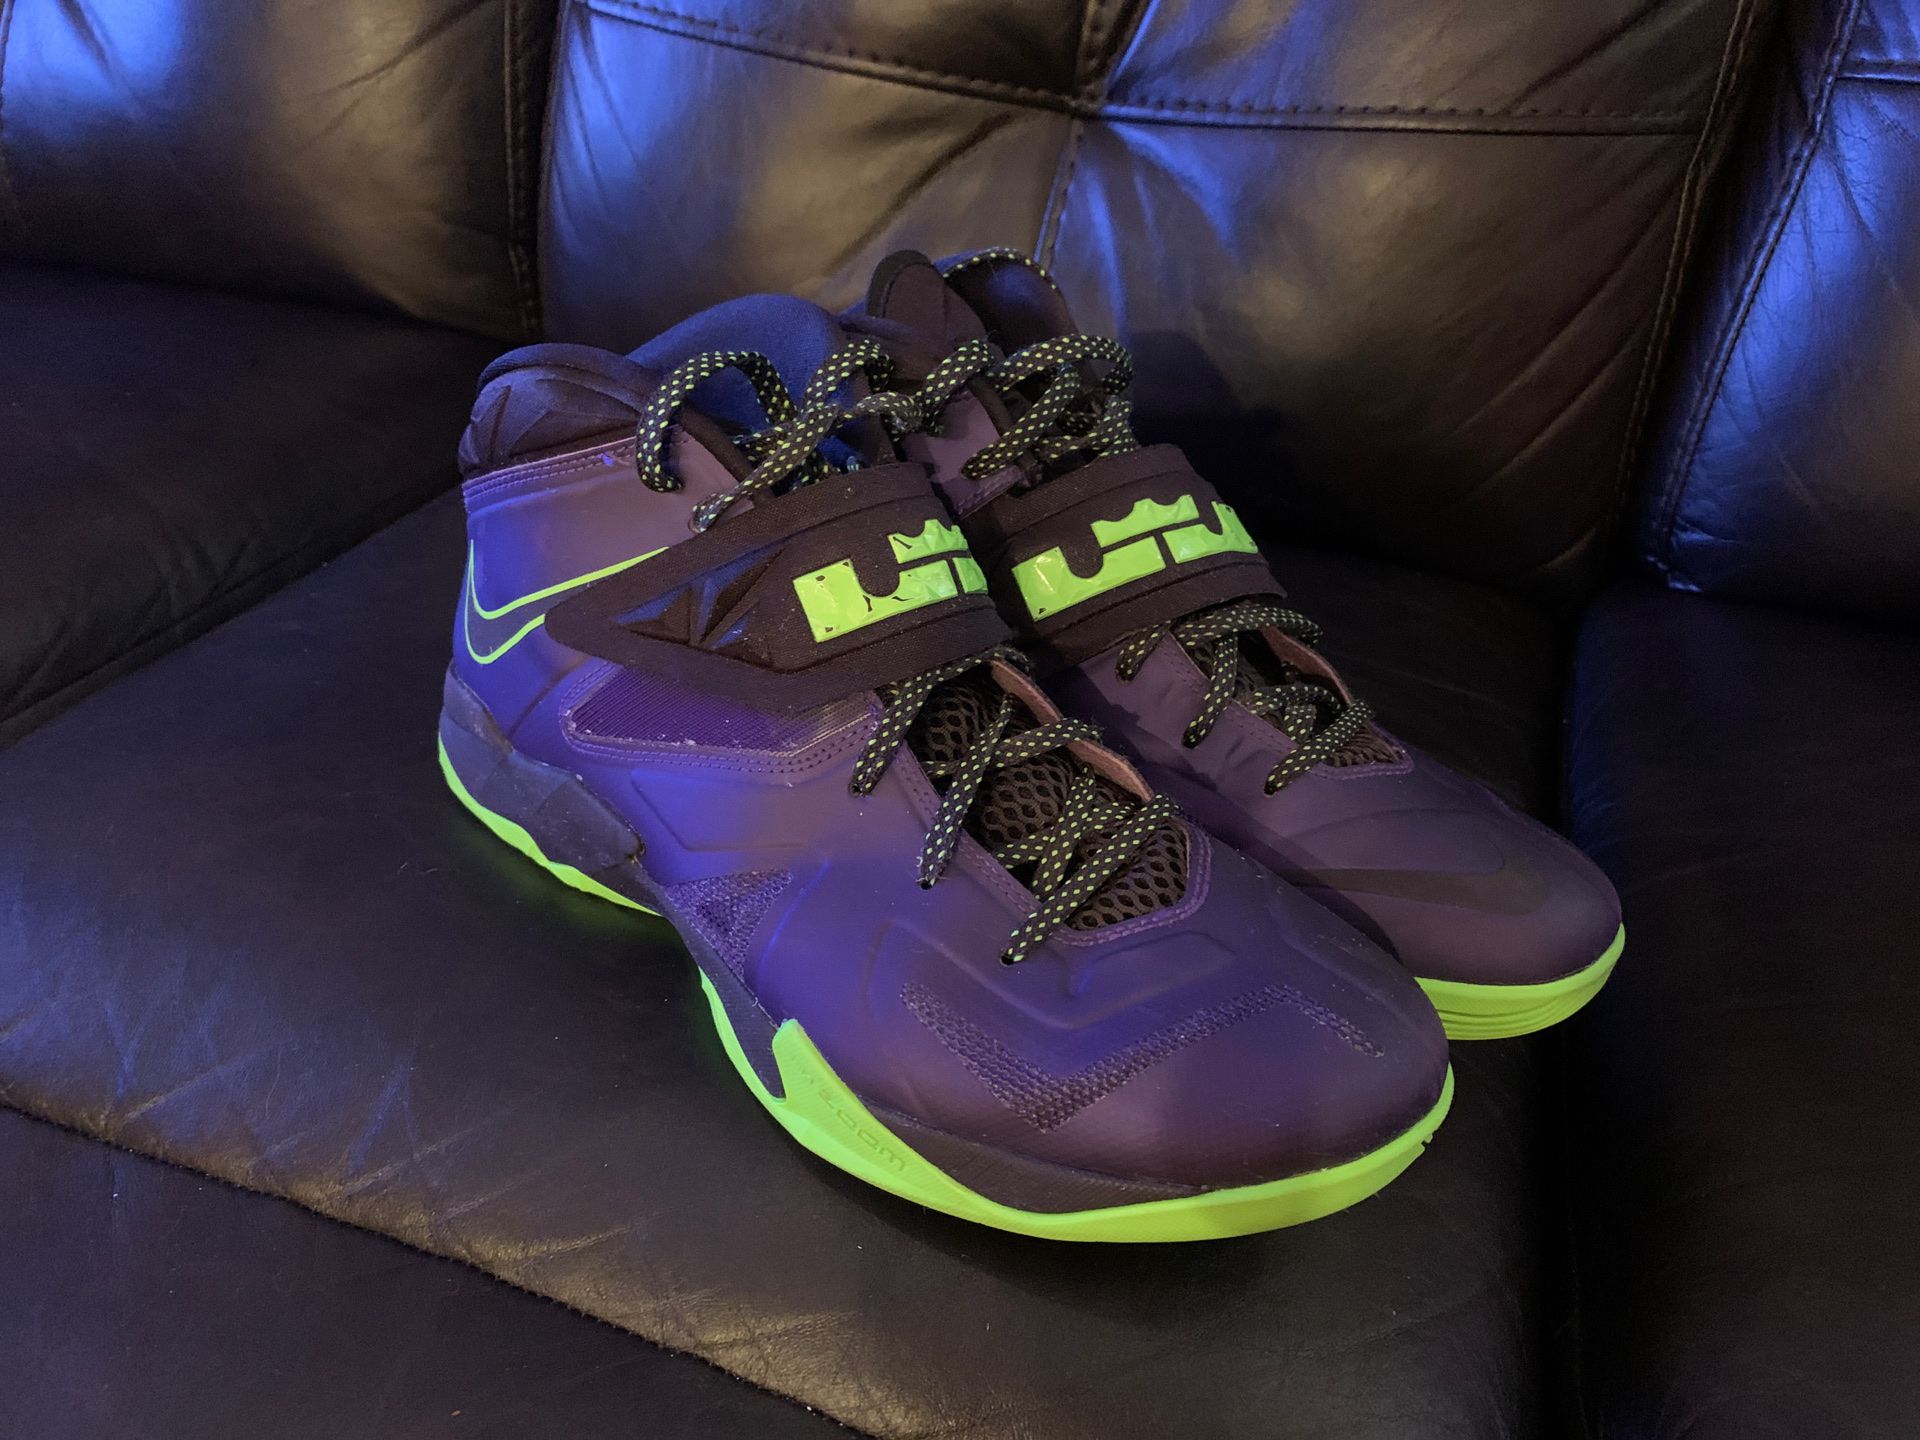 Nike LeBron soldier 7 shoes